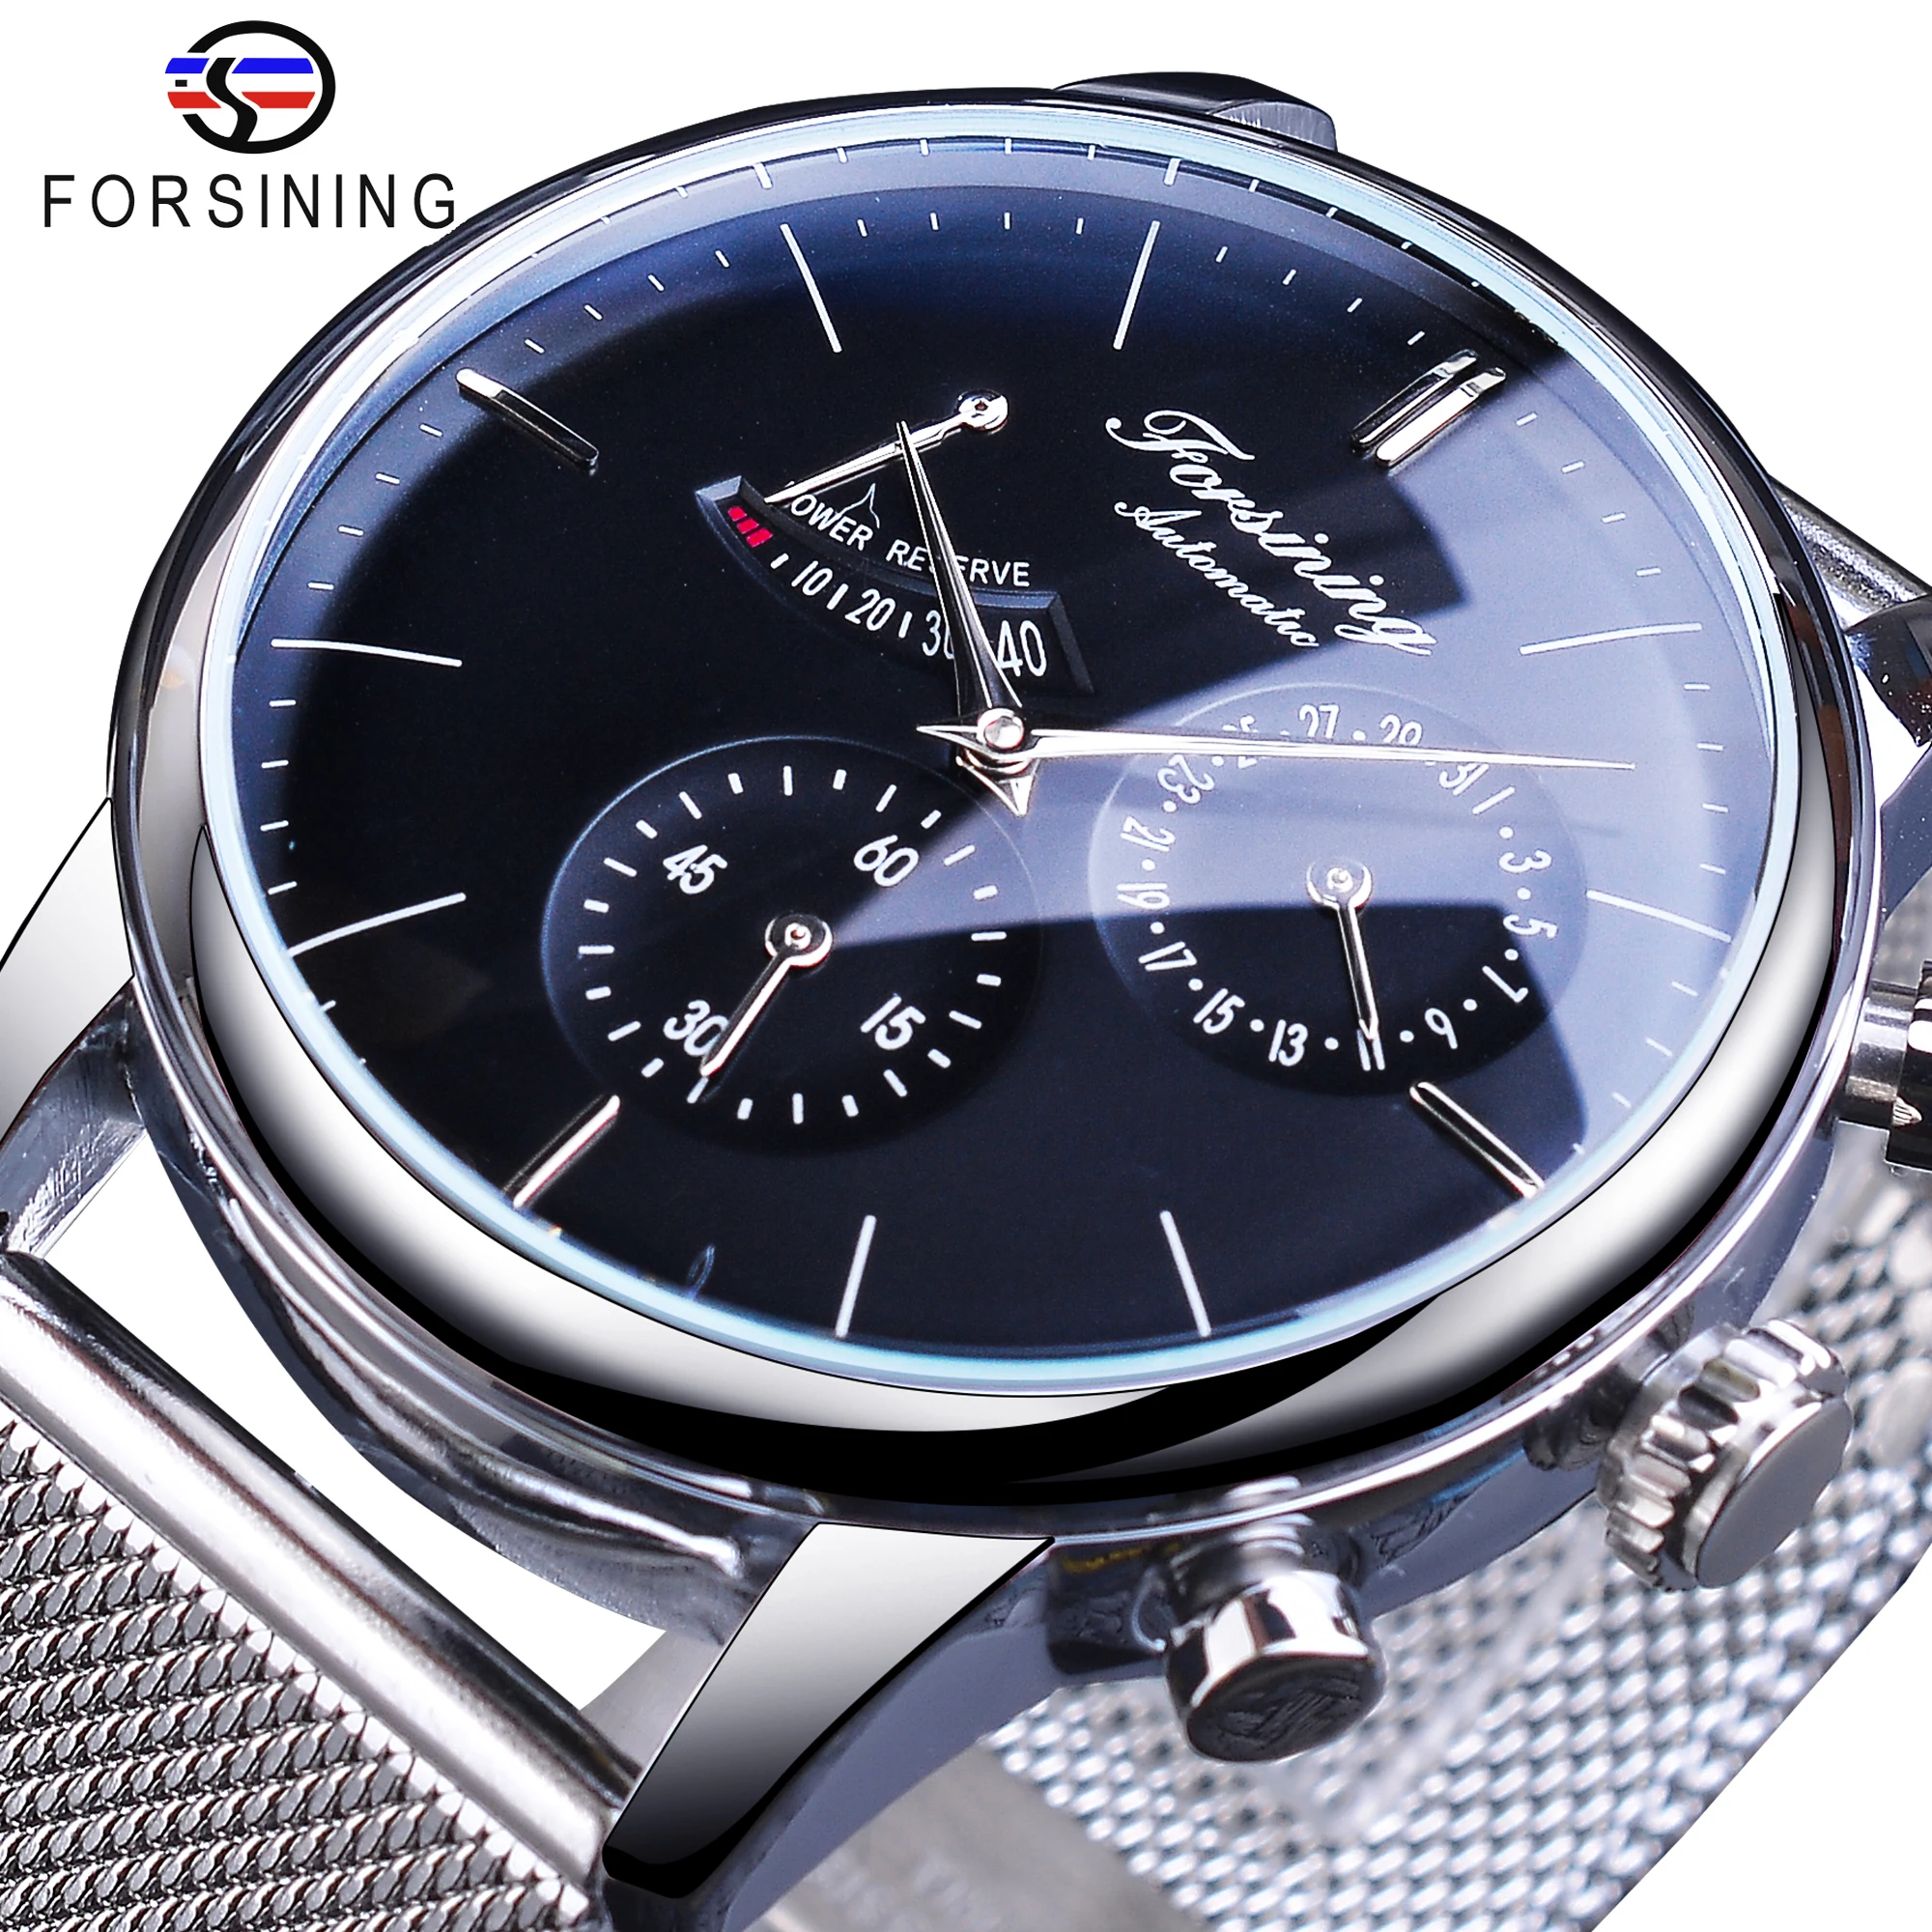 Forsining 2021 Business Fashion Date Design Silver Steel Power Reserve Mens Mechanical Automatic Wrist Watches Top Brand Luxury a brief history of britain 1851 2021 from world power to